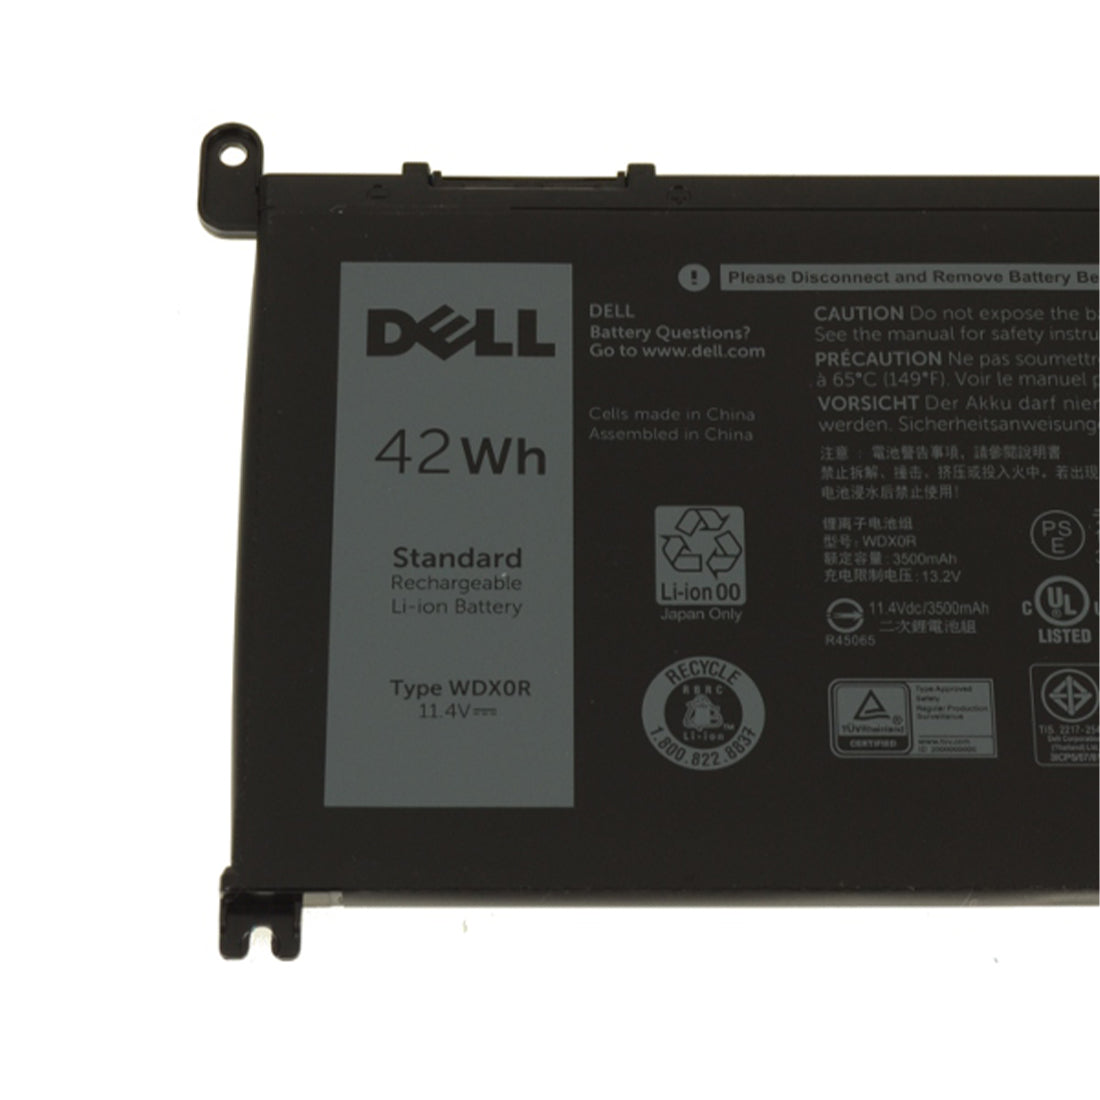 Dell Original 3500mAh 11.4V 42WHR 3-Cell Replacement Laptop Battery for Inspiron 15 7570